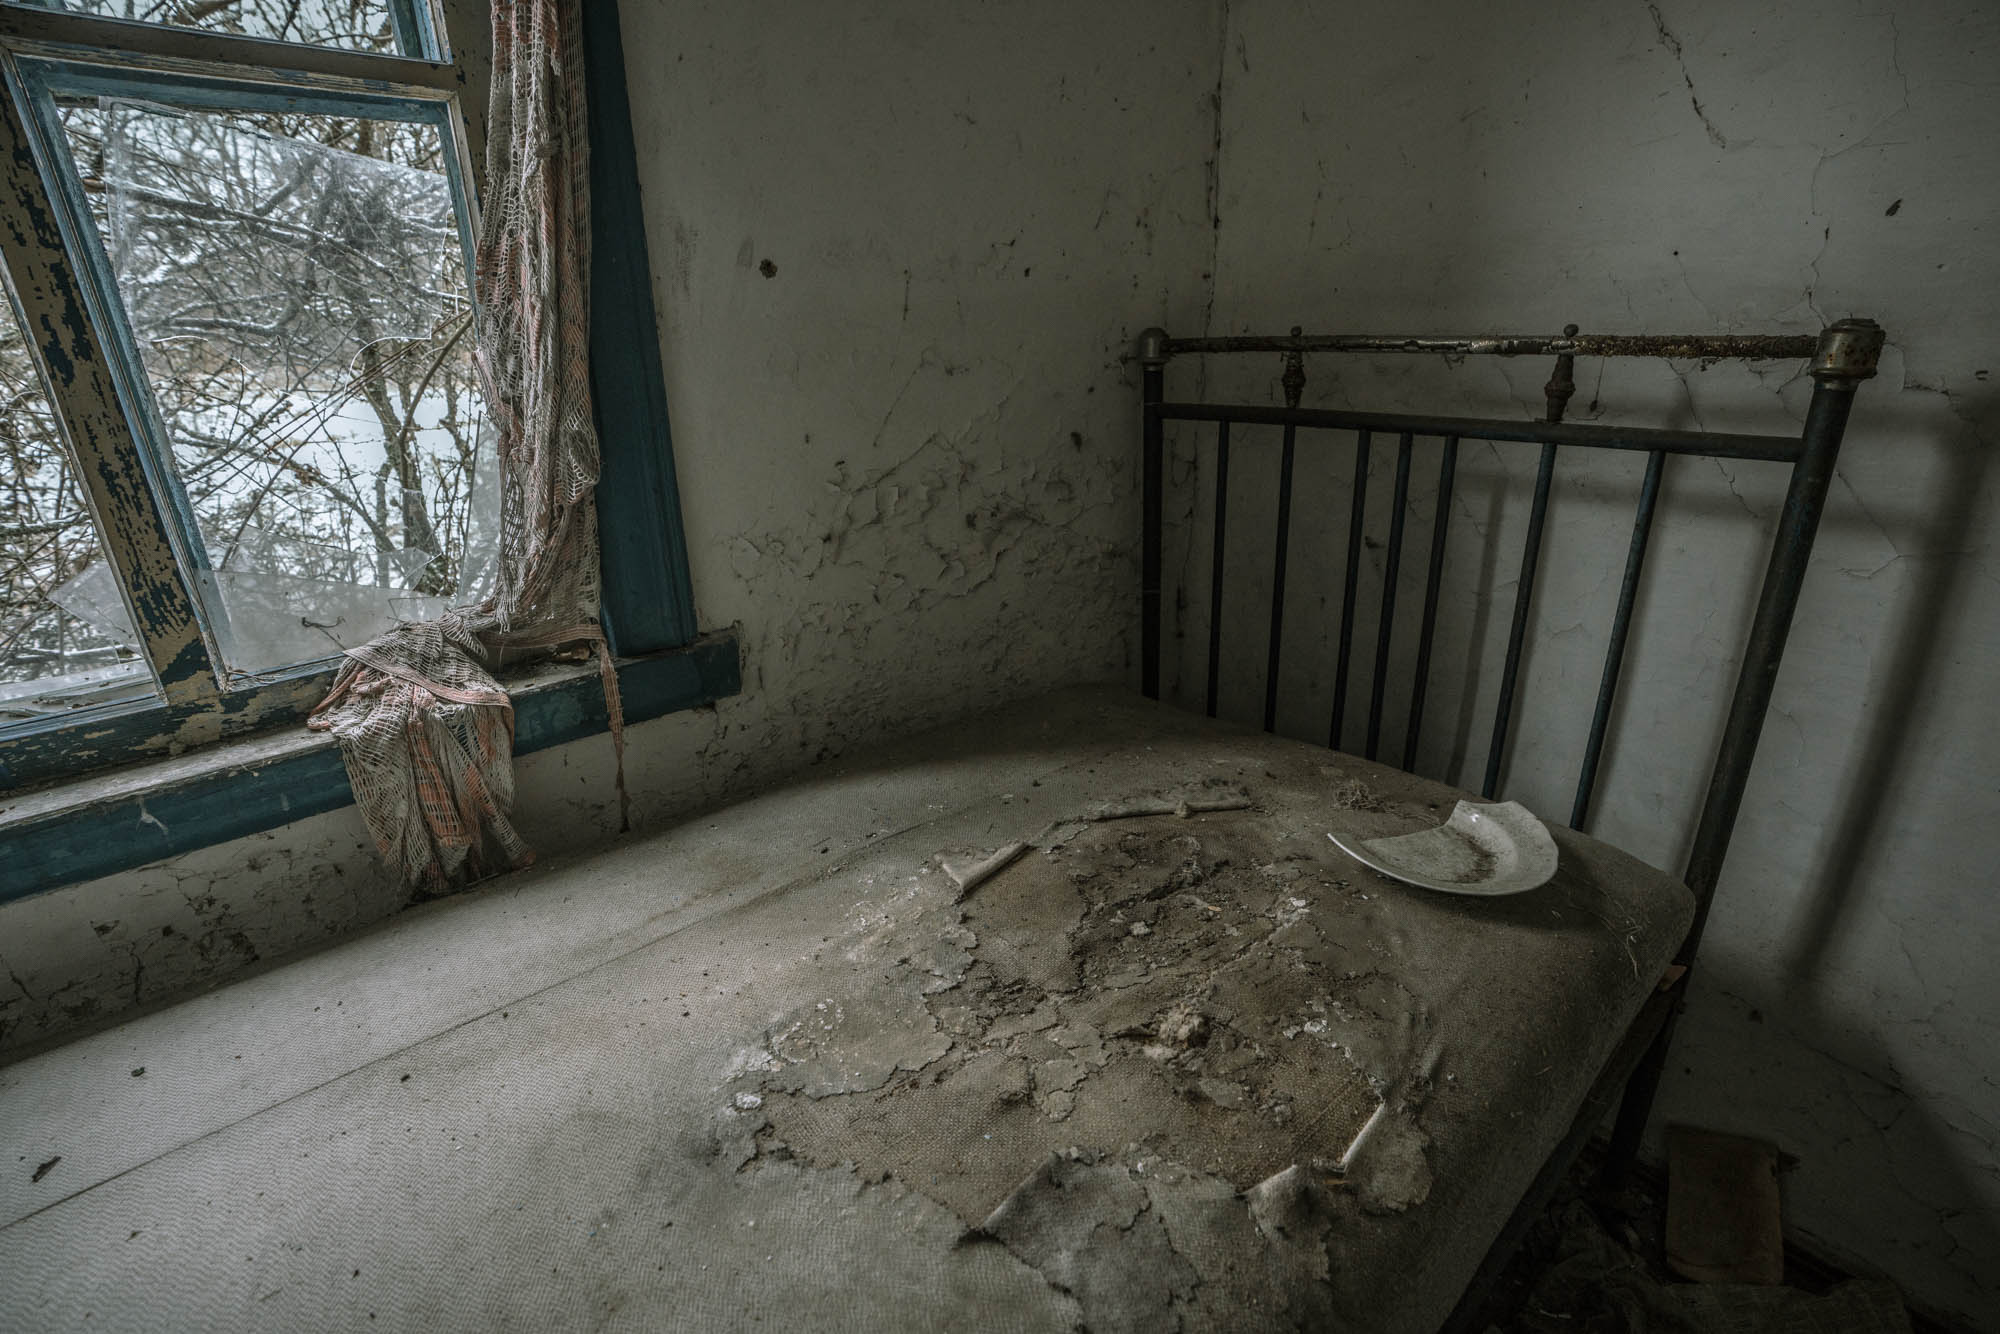 Chernobyl Exclusion